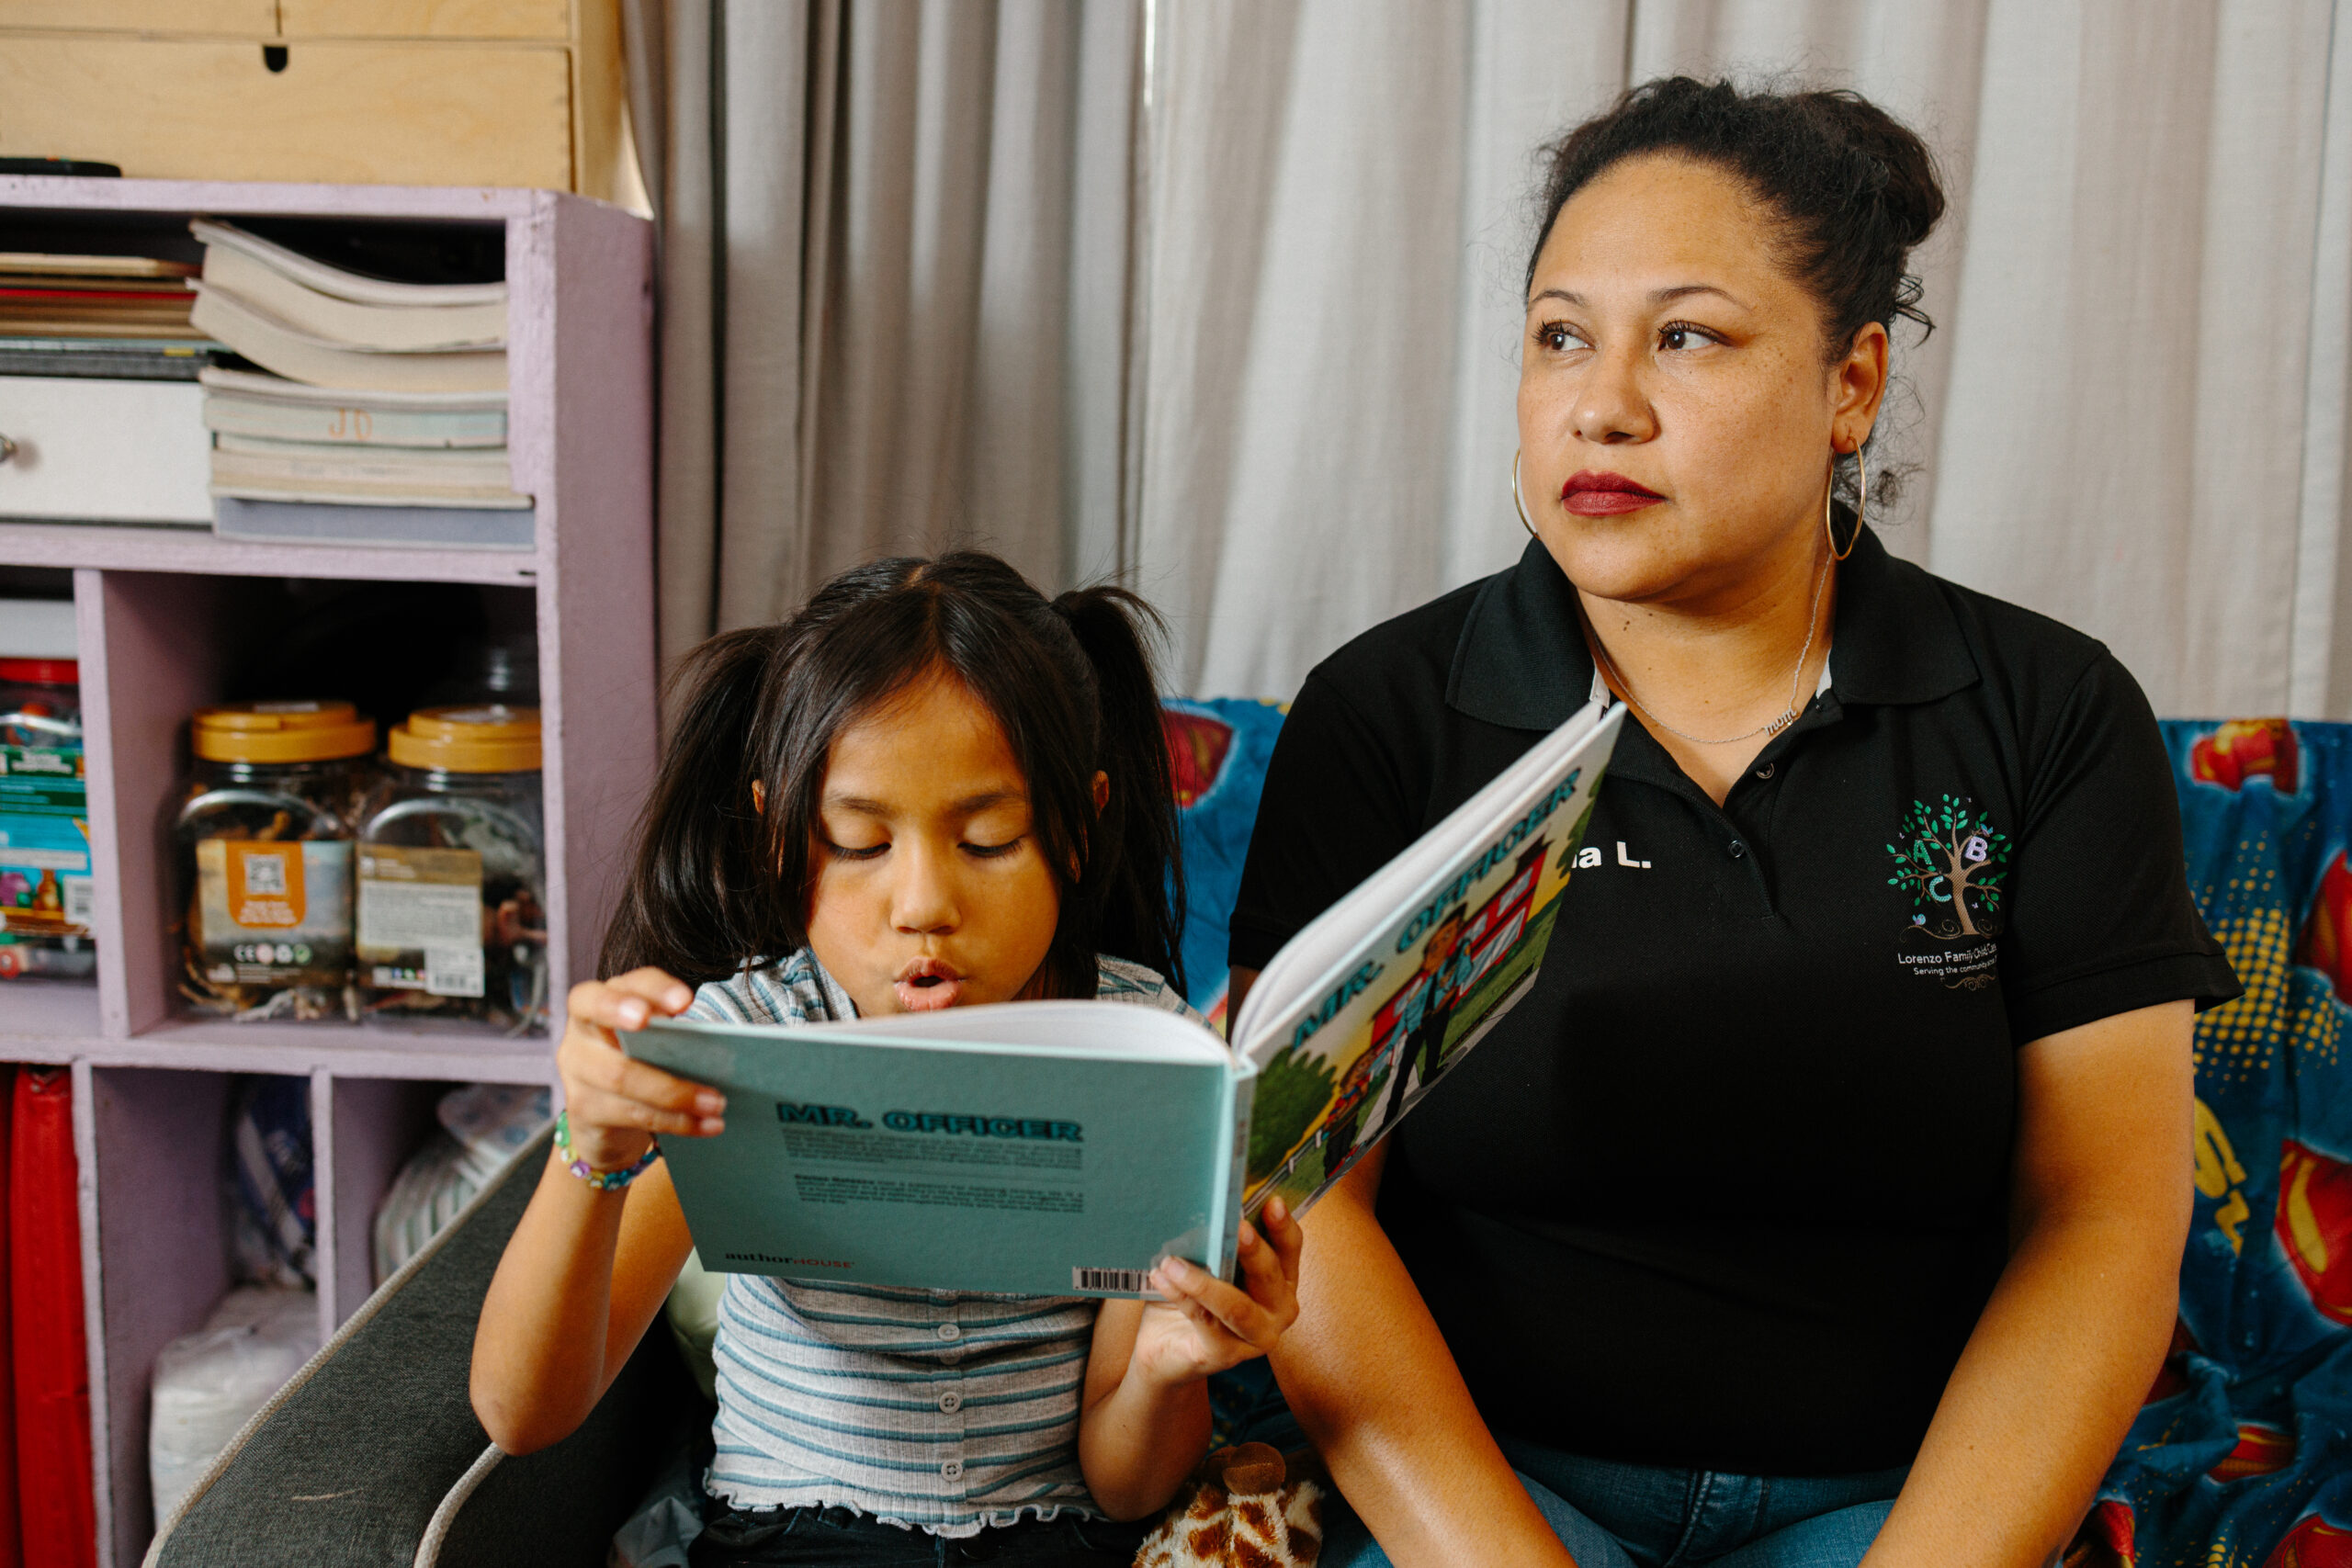 Adriana Lorenzo poses for a portrait at her home based daycare, The Lorenzo Family Child Care while her daughter reads a book next to her.